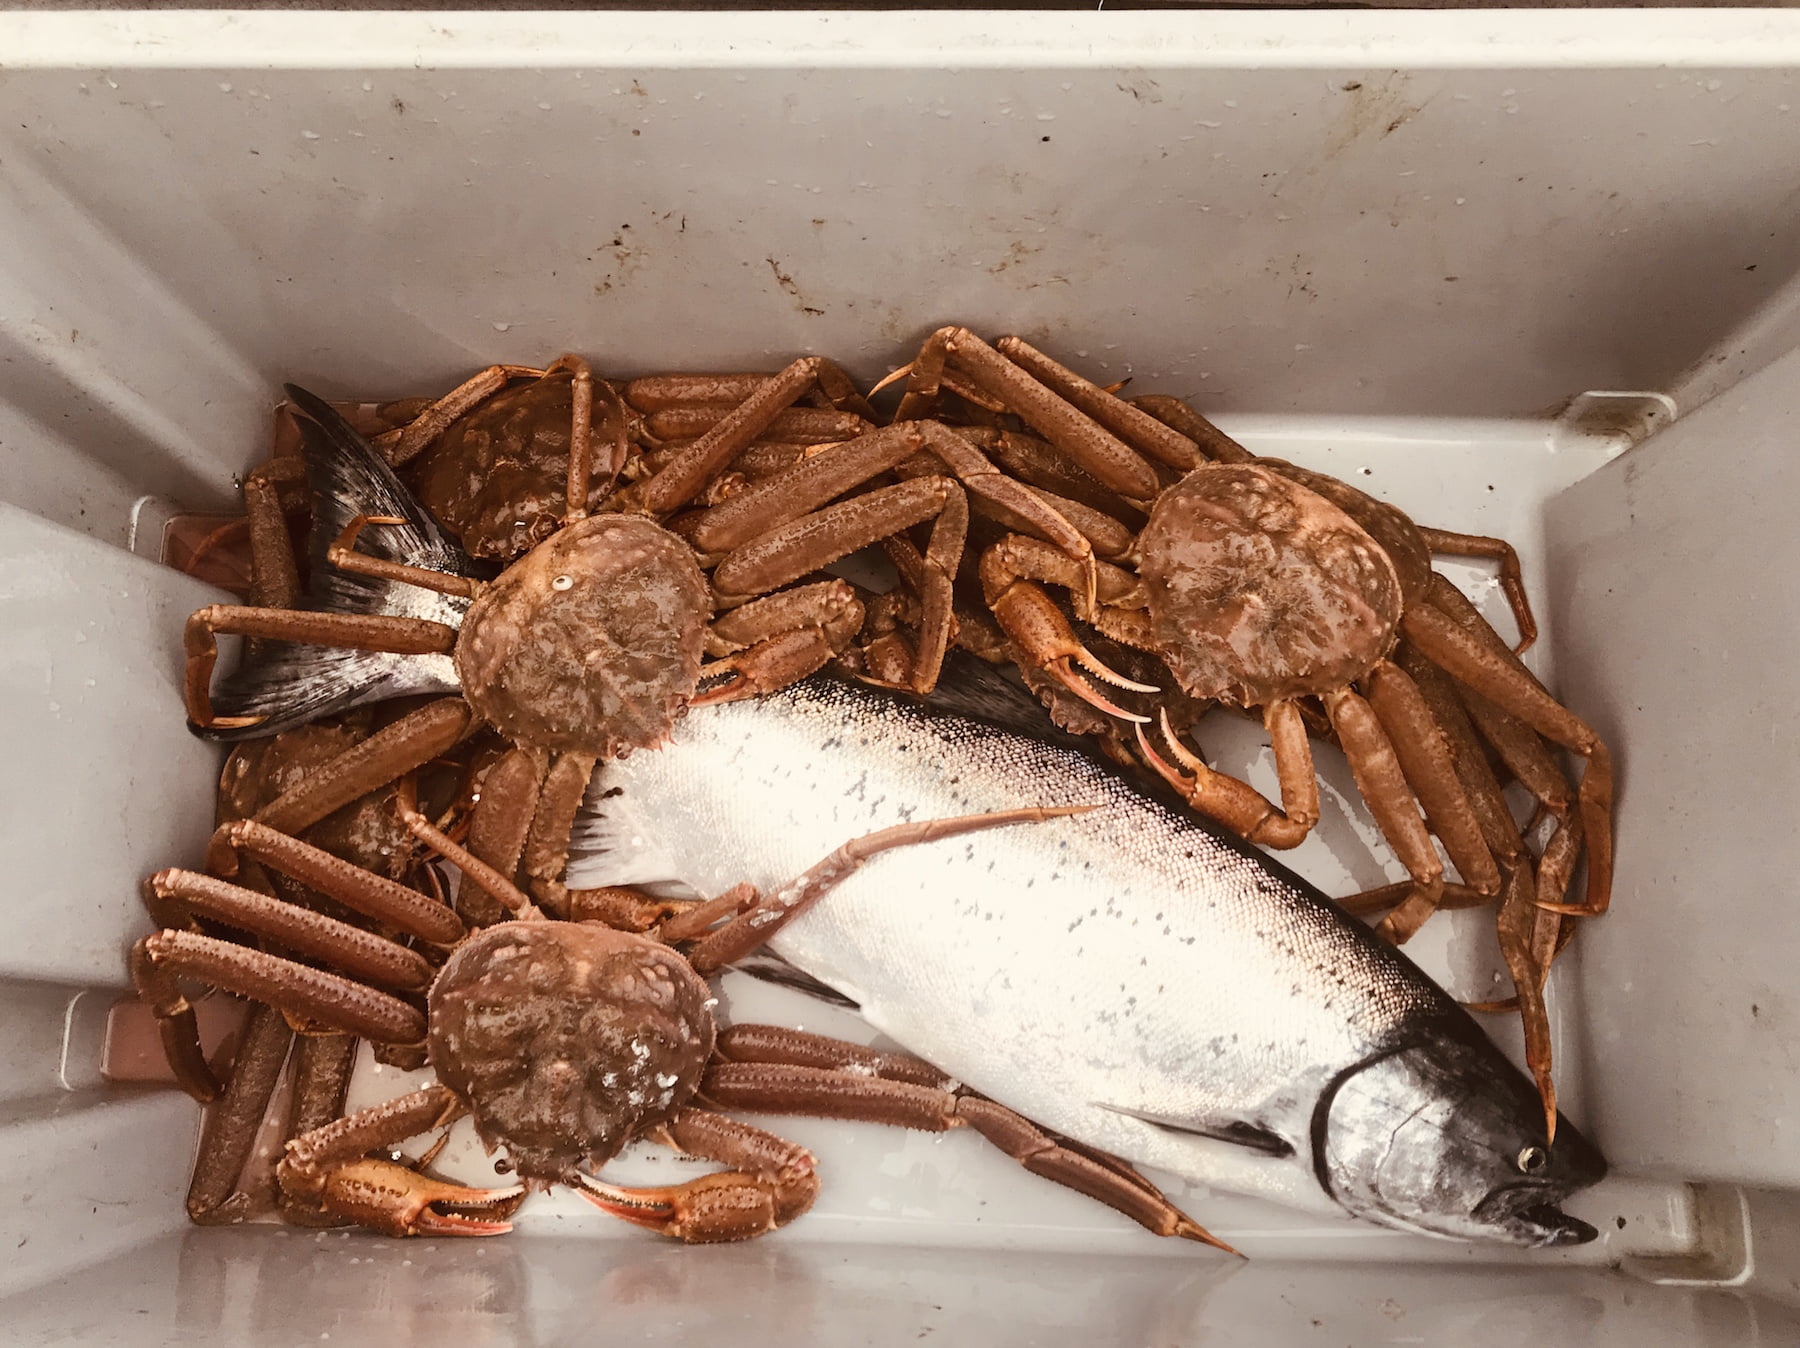 King salmon and Tanner crab in cooler